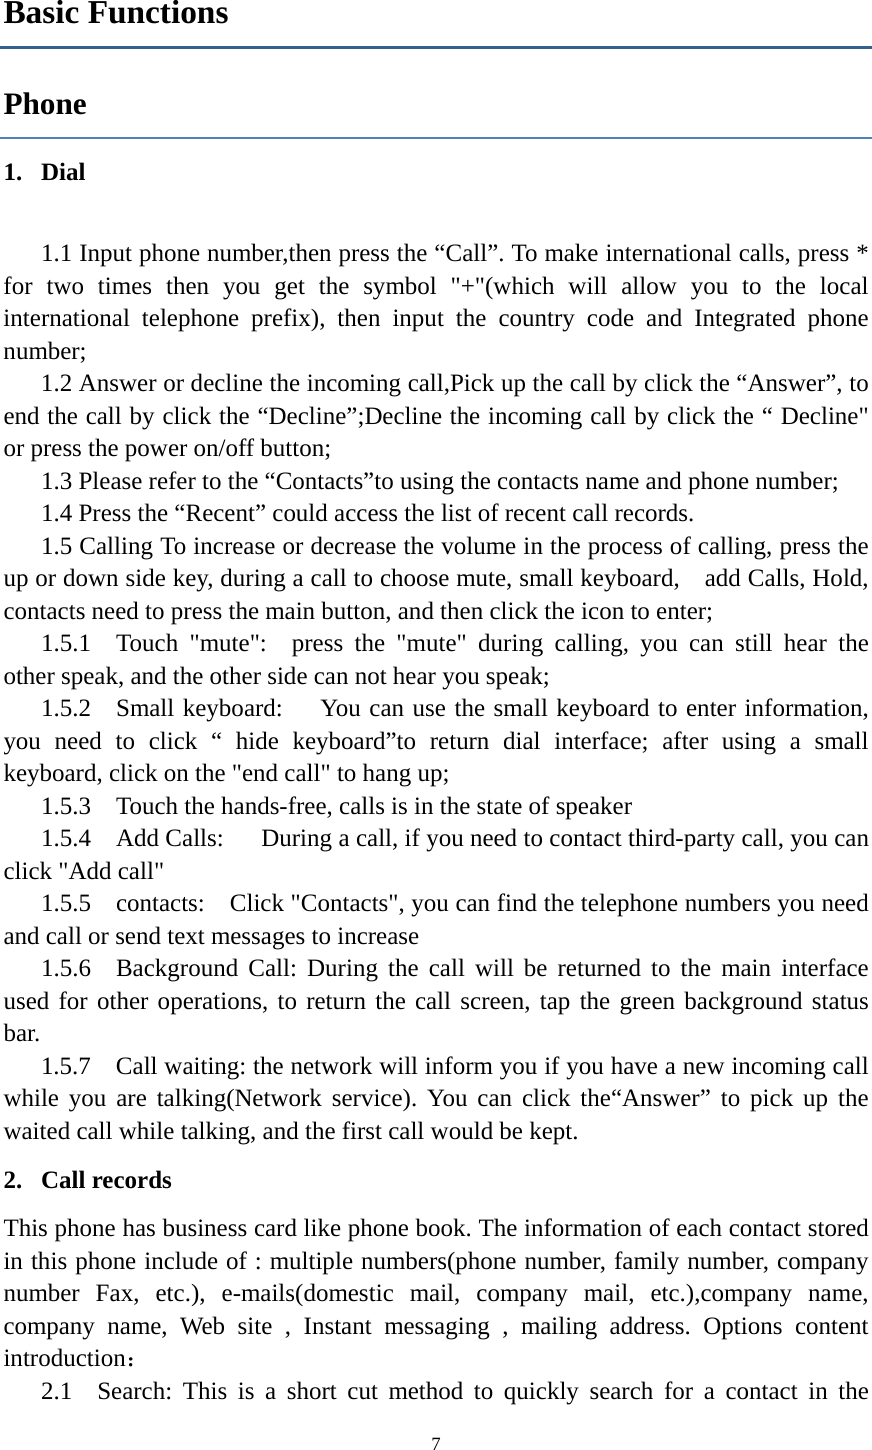  7Basic Functions Phone 1. Dial    1.1 Input phone number,then press the “Call”. To make international calls, press * for two times then you get the symbol &quot;+&quot;(which will allow you to the local international telephone prefix), then input the country code and Integrated phone number; 1.2 Answer or decline the incoming call,Pick up the call by click the “Answer”, to end the call by click the “Decline”;Decline the incoming call by click the “ Decline&quot; or press the power on/off button; 1.3 Please refer to the “Contacts”to using the contacts name and phone number; 1.4 Press the “Recent” could access the list of recent call records. 1.5 Calling To increase or decrease the volume in the process of calling, press the up or down side key, during a call to choose mute, small keyboard,    add Calls, Hold, contacts need to press the main button, and then click the icon to enter; 1.5.1  Touch &quot;mute&quot;:  press the &quot;mute&quot; during calling, you can still hear the other speak, and the other side can not hear you speak; 1.5.2  Small keyboard:     You can use the small keyboard to enter information, you need to click “ hide keyboard”to return dial interface; after using a small keyboard, click on the &quot;end call&quot; to hang up; 1.5.3    Touch the hands-free, calls is in the state of speaker 1.5.4  Add Calls:   During a call, if you need to contact third-party call, you can click &quot;Add call&quot; 1.5.5  contacts:  Click &quot;Contacts&quot;, you can find the telephone numbers you need and call or send text messages to increase 1.5.6  Background Call: During the call will be returned to the main interface used for other operations, to return the call screen, tap the green background status bar. 1.5.7    Call waiting: the network will inform you if you have a new incoming call while you are talking(Network service). You can click the“Answer” to pick up the waited call while talking, and the first call would be kept. 2. Call records This phone has business card like phone book. The information of each contact stored in this phone include of : multiple numbers(phone number, family number, company number Fax, etc.), e-mails(domestic mail, company mail, etc.),company name, company name, Web site , Instant messaging , mailing address. Options content introduction： 2.1  Search: This is a short cut method to quickly search for a contact in the 